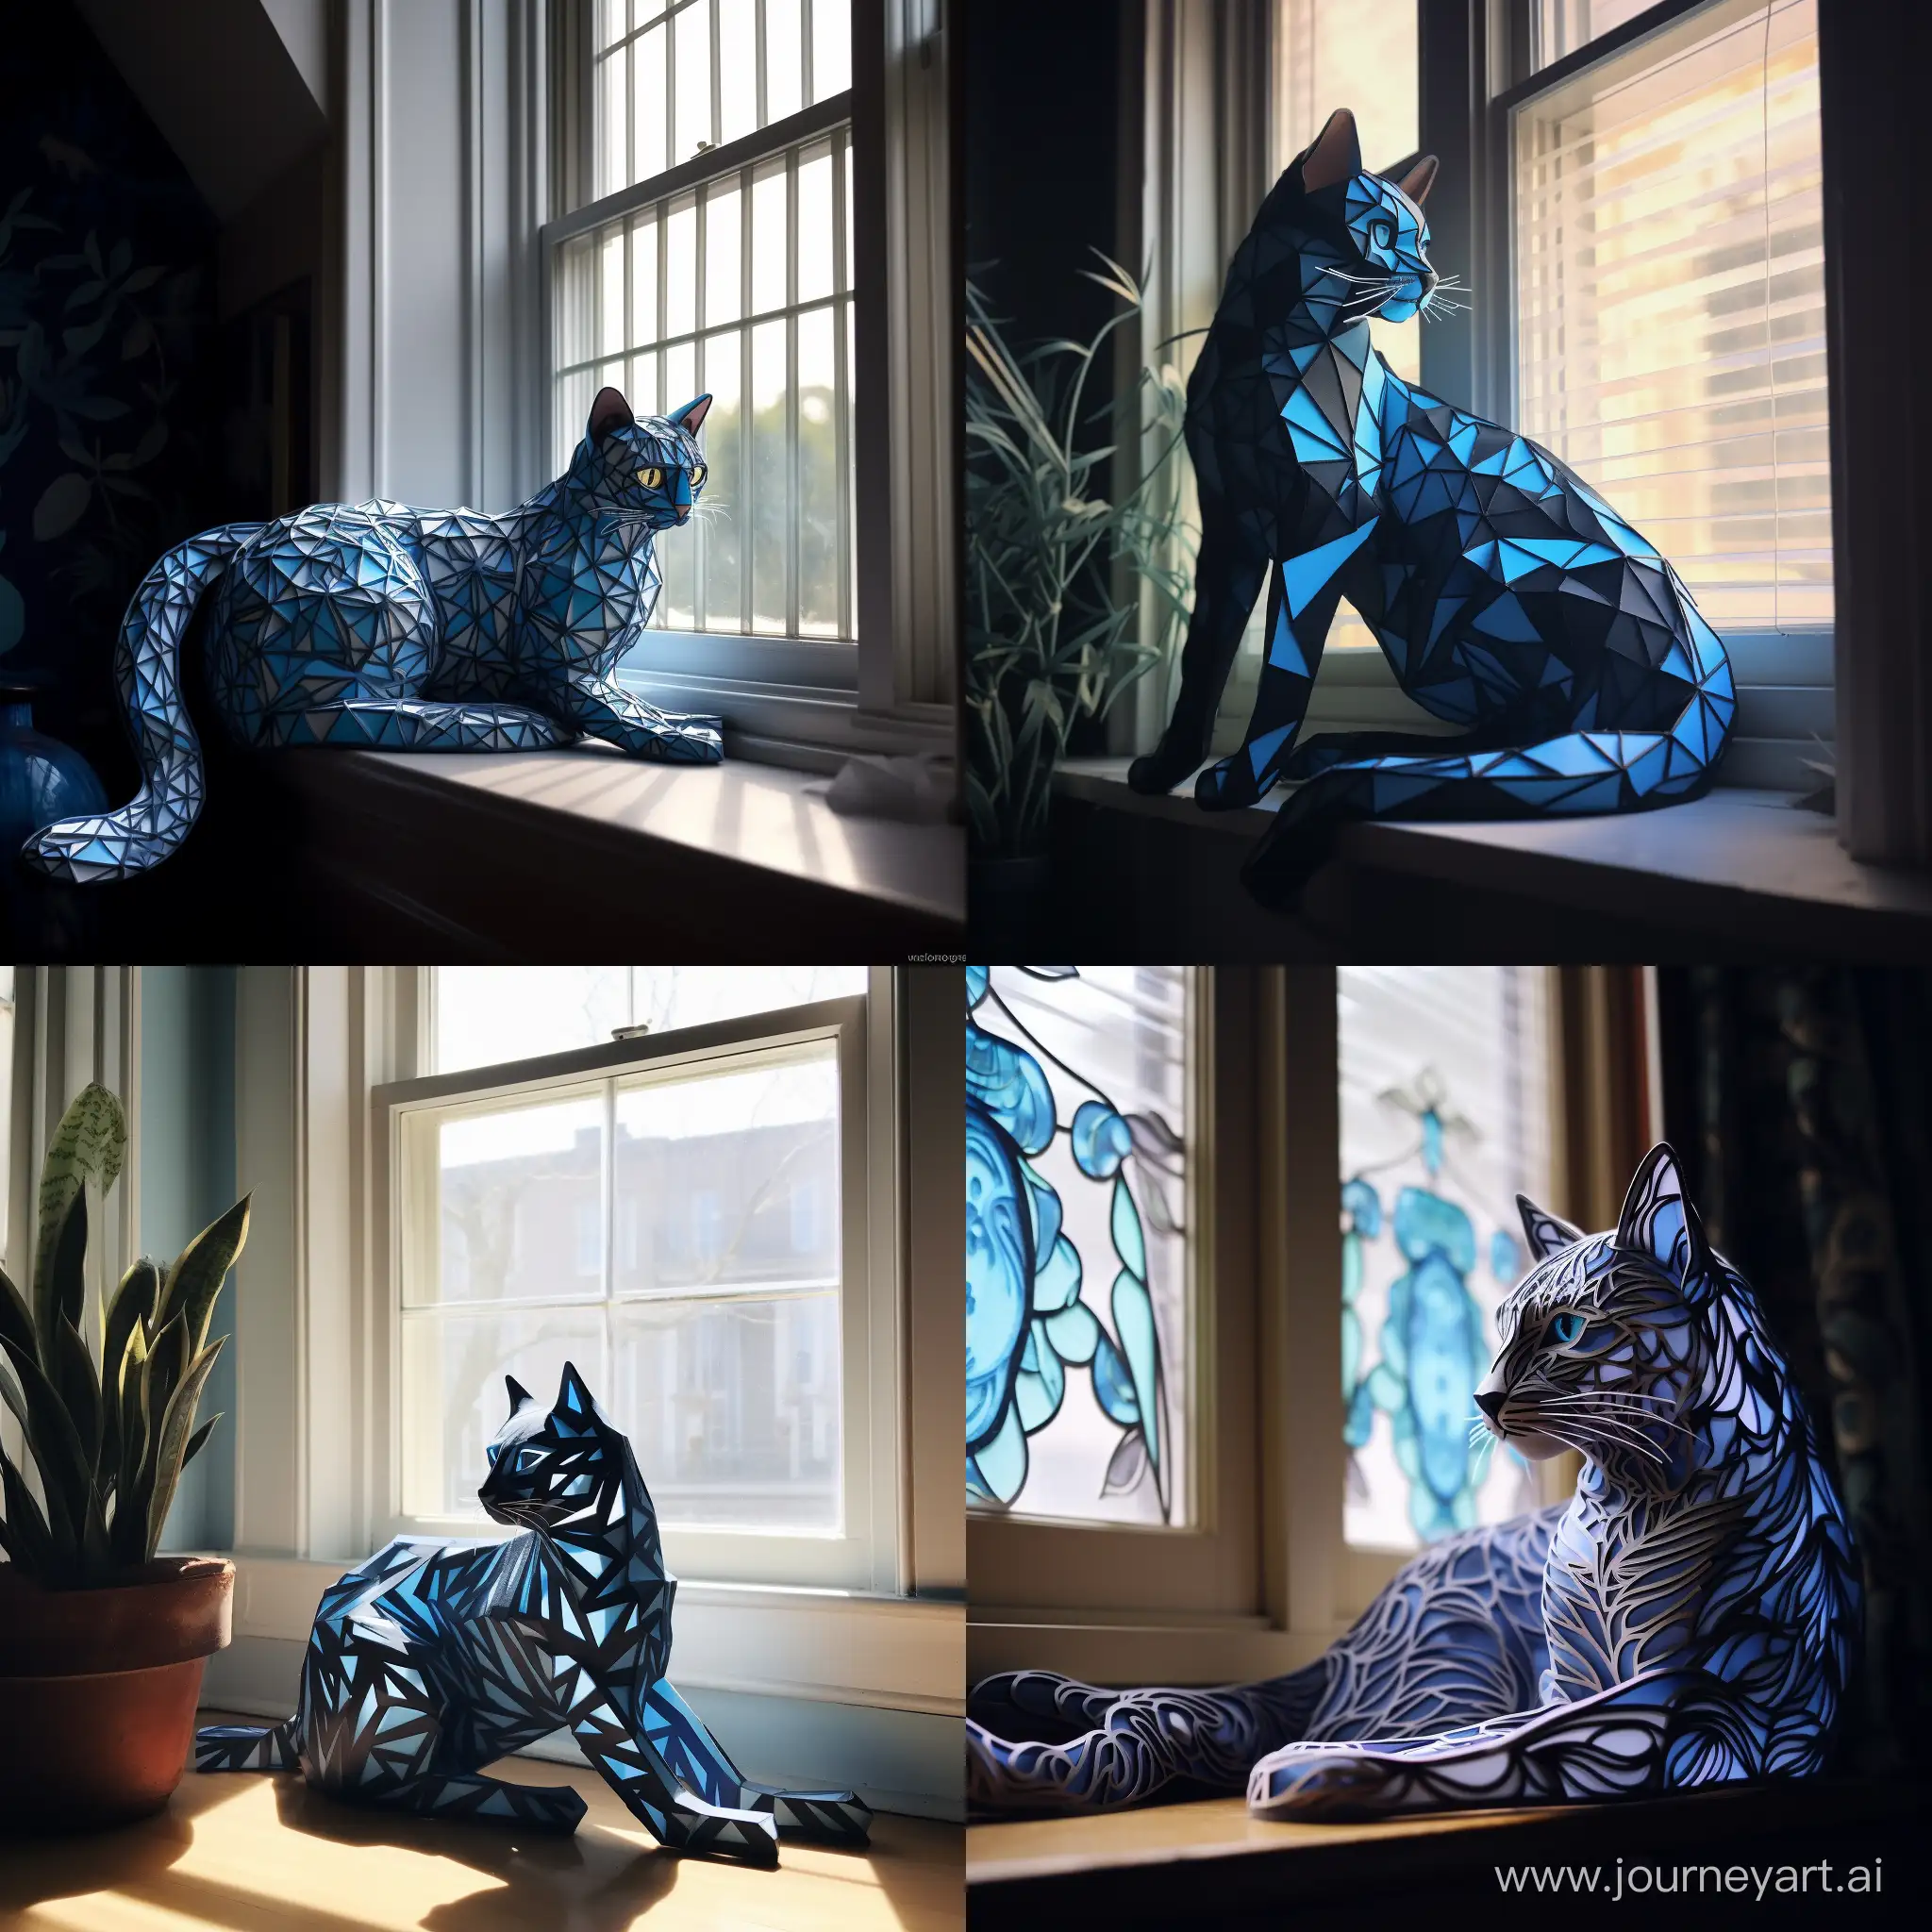 Relaxed-Blue-Cat-with-Black-Patterns-Lounging-by-Window-in-Paper-Art